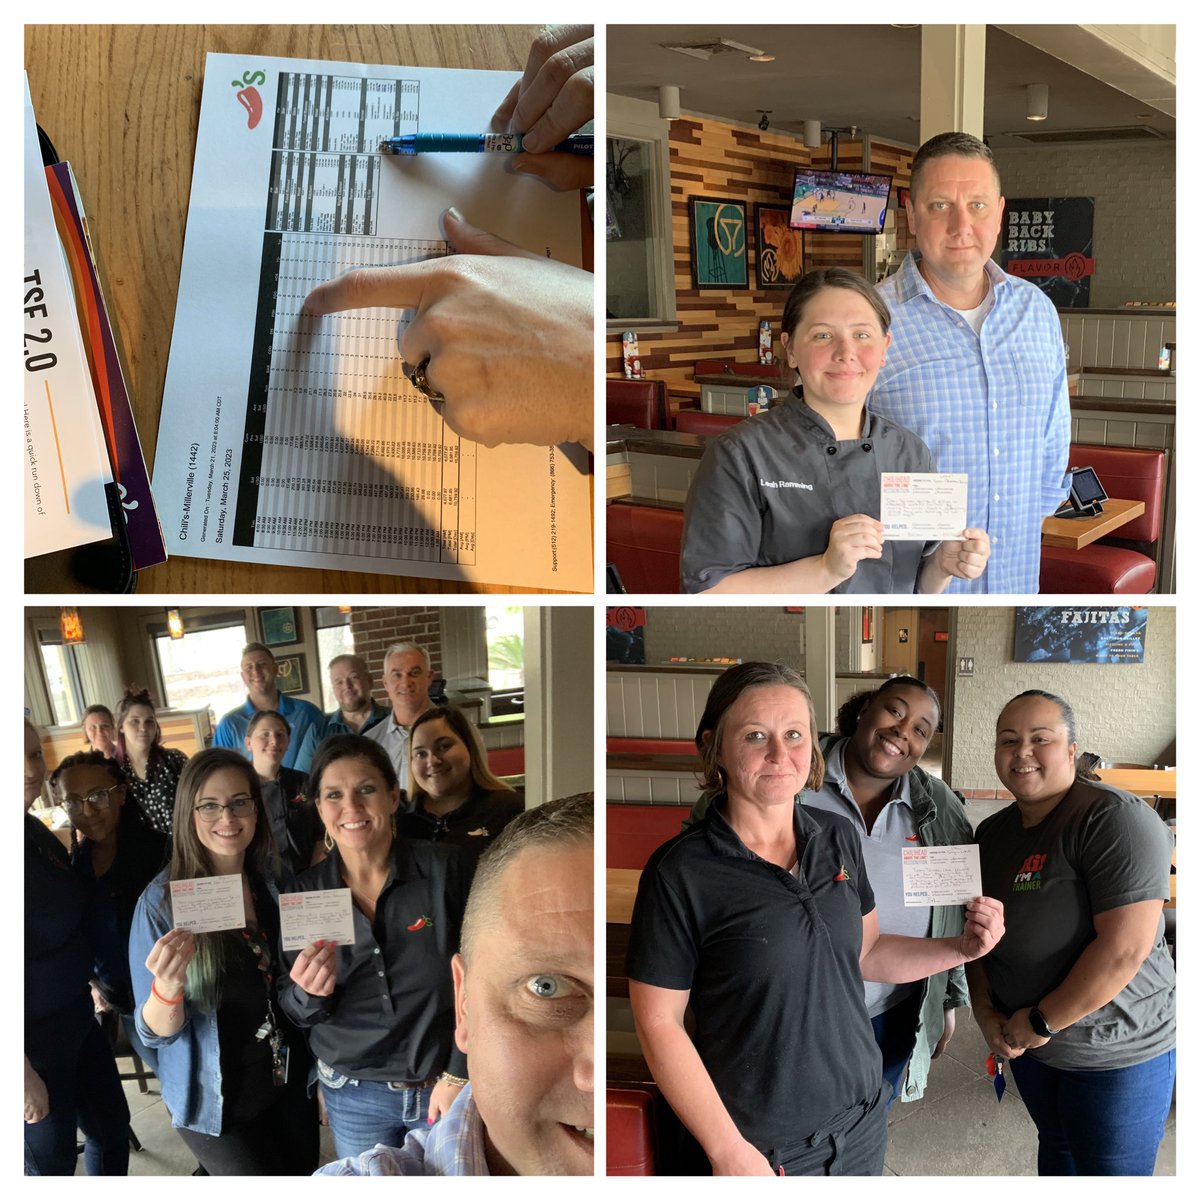 Hello Twitterverse! Fun day of Hospitality AO development yesterday! We got stronger in Blue Bars, Chili’s Clean, People Tools and TSE 2.0! Excited to see us run with it! #CGC @taryn_mahaffey @train3rgirl @okcayla2305 @monica_kellar #HospitalityLeaders